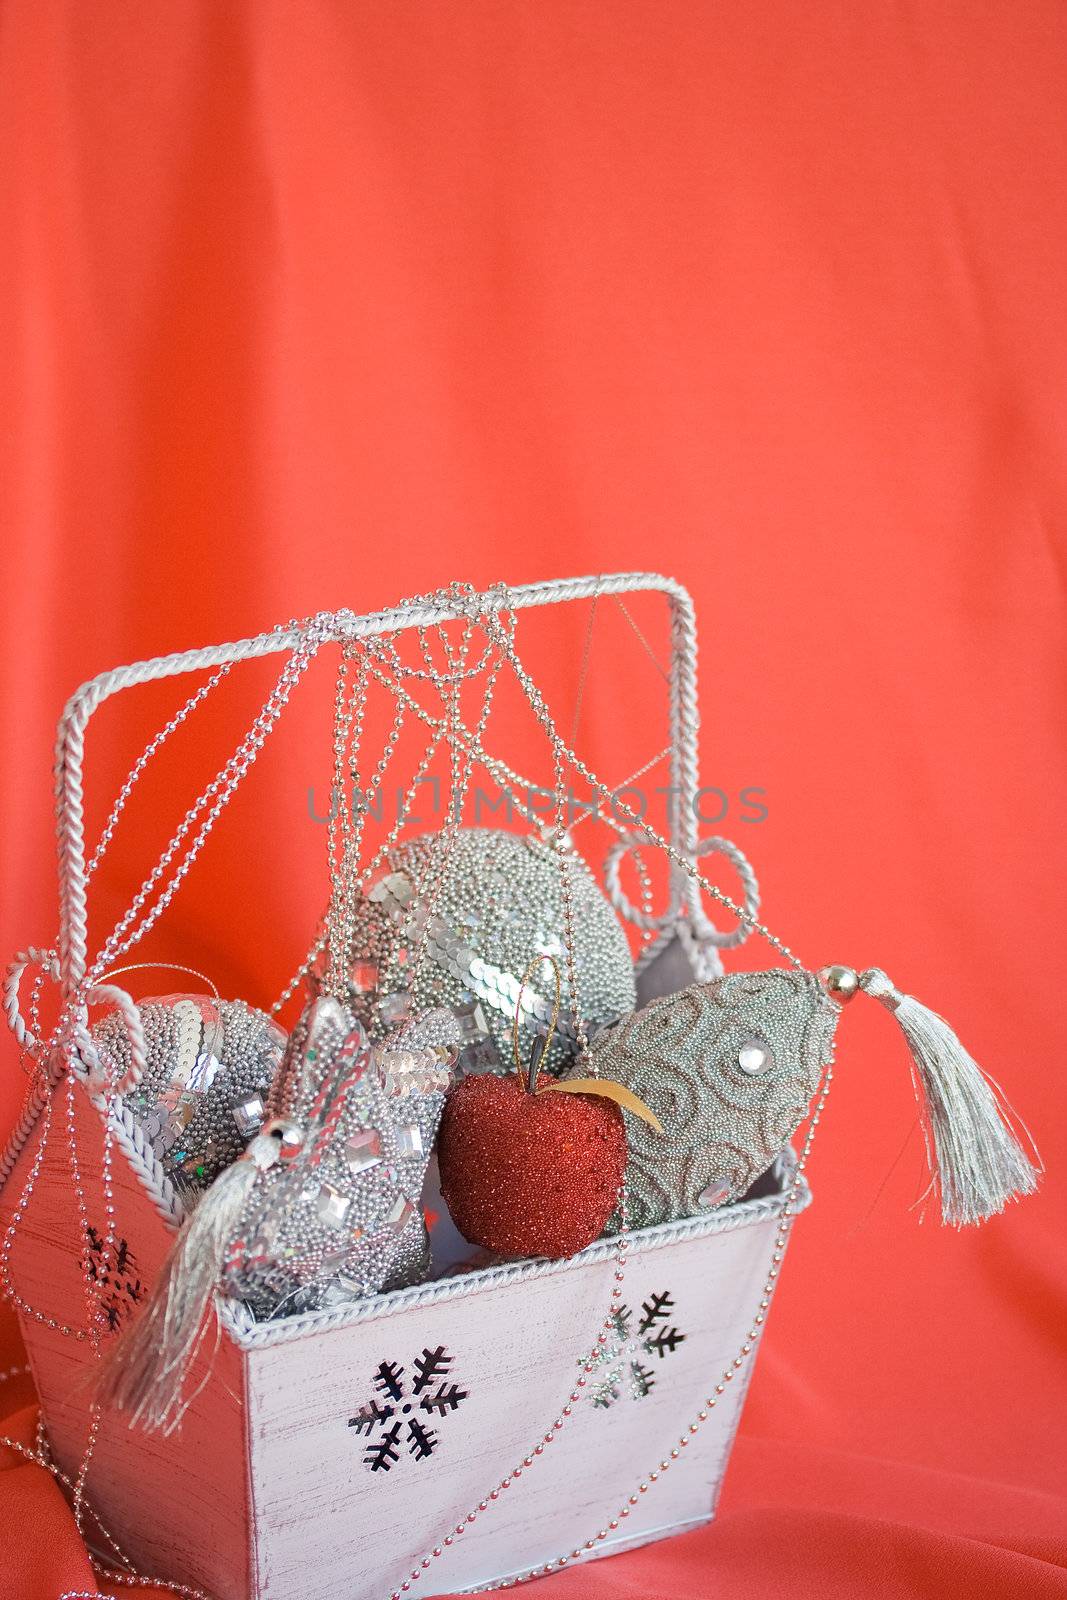 Red apple in box with silver christmas decoration on red